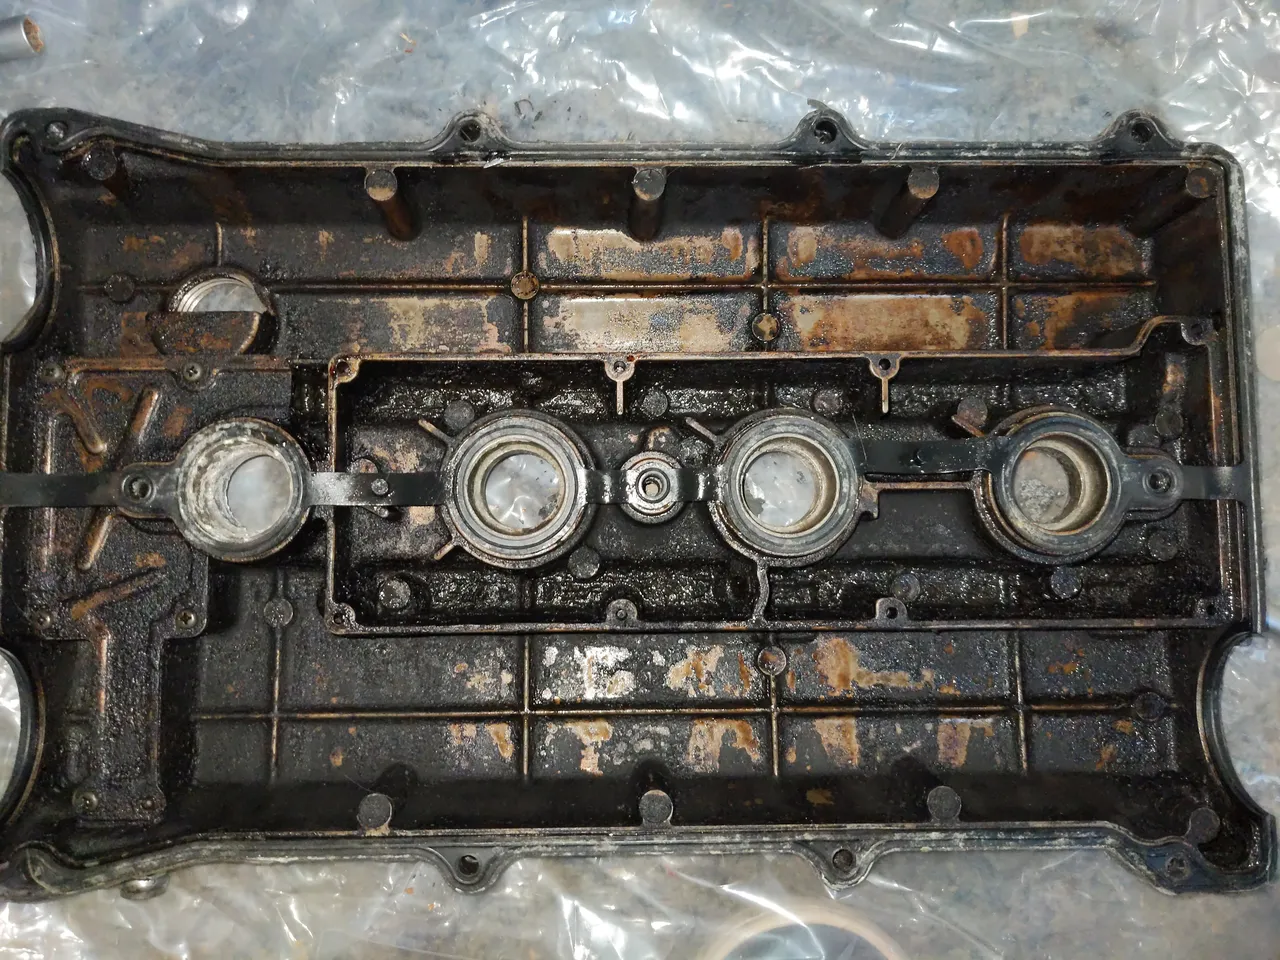 The underside of my B6T rocker cover, with blackened oil baked on so hard that it has hardened.